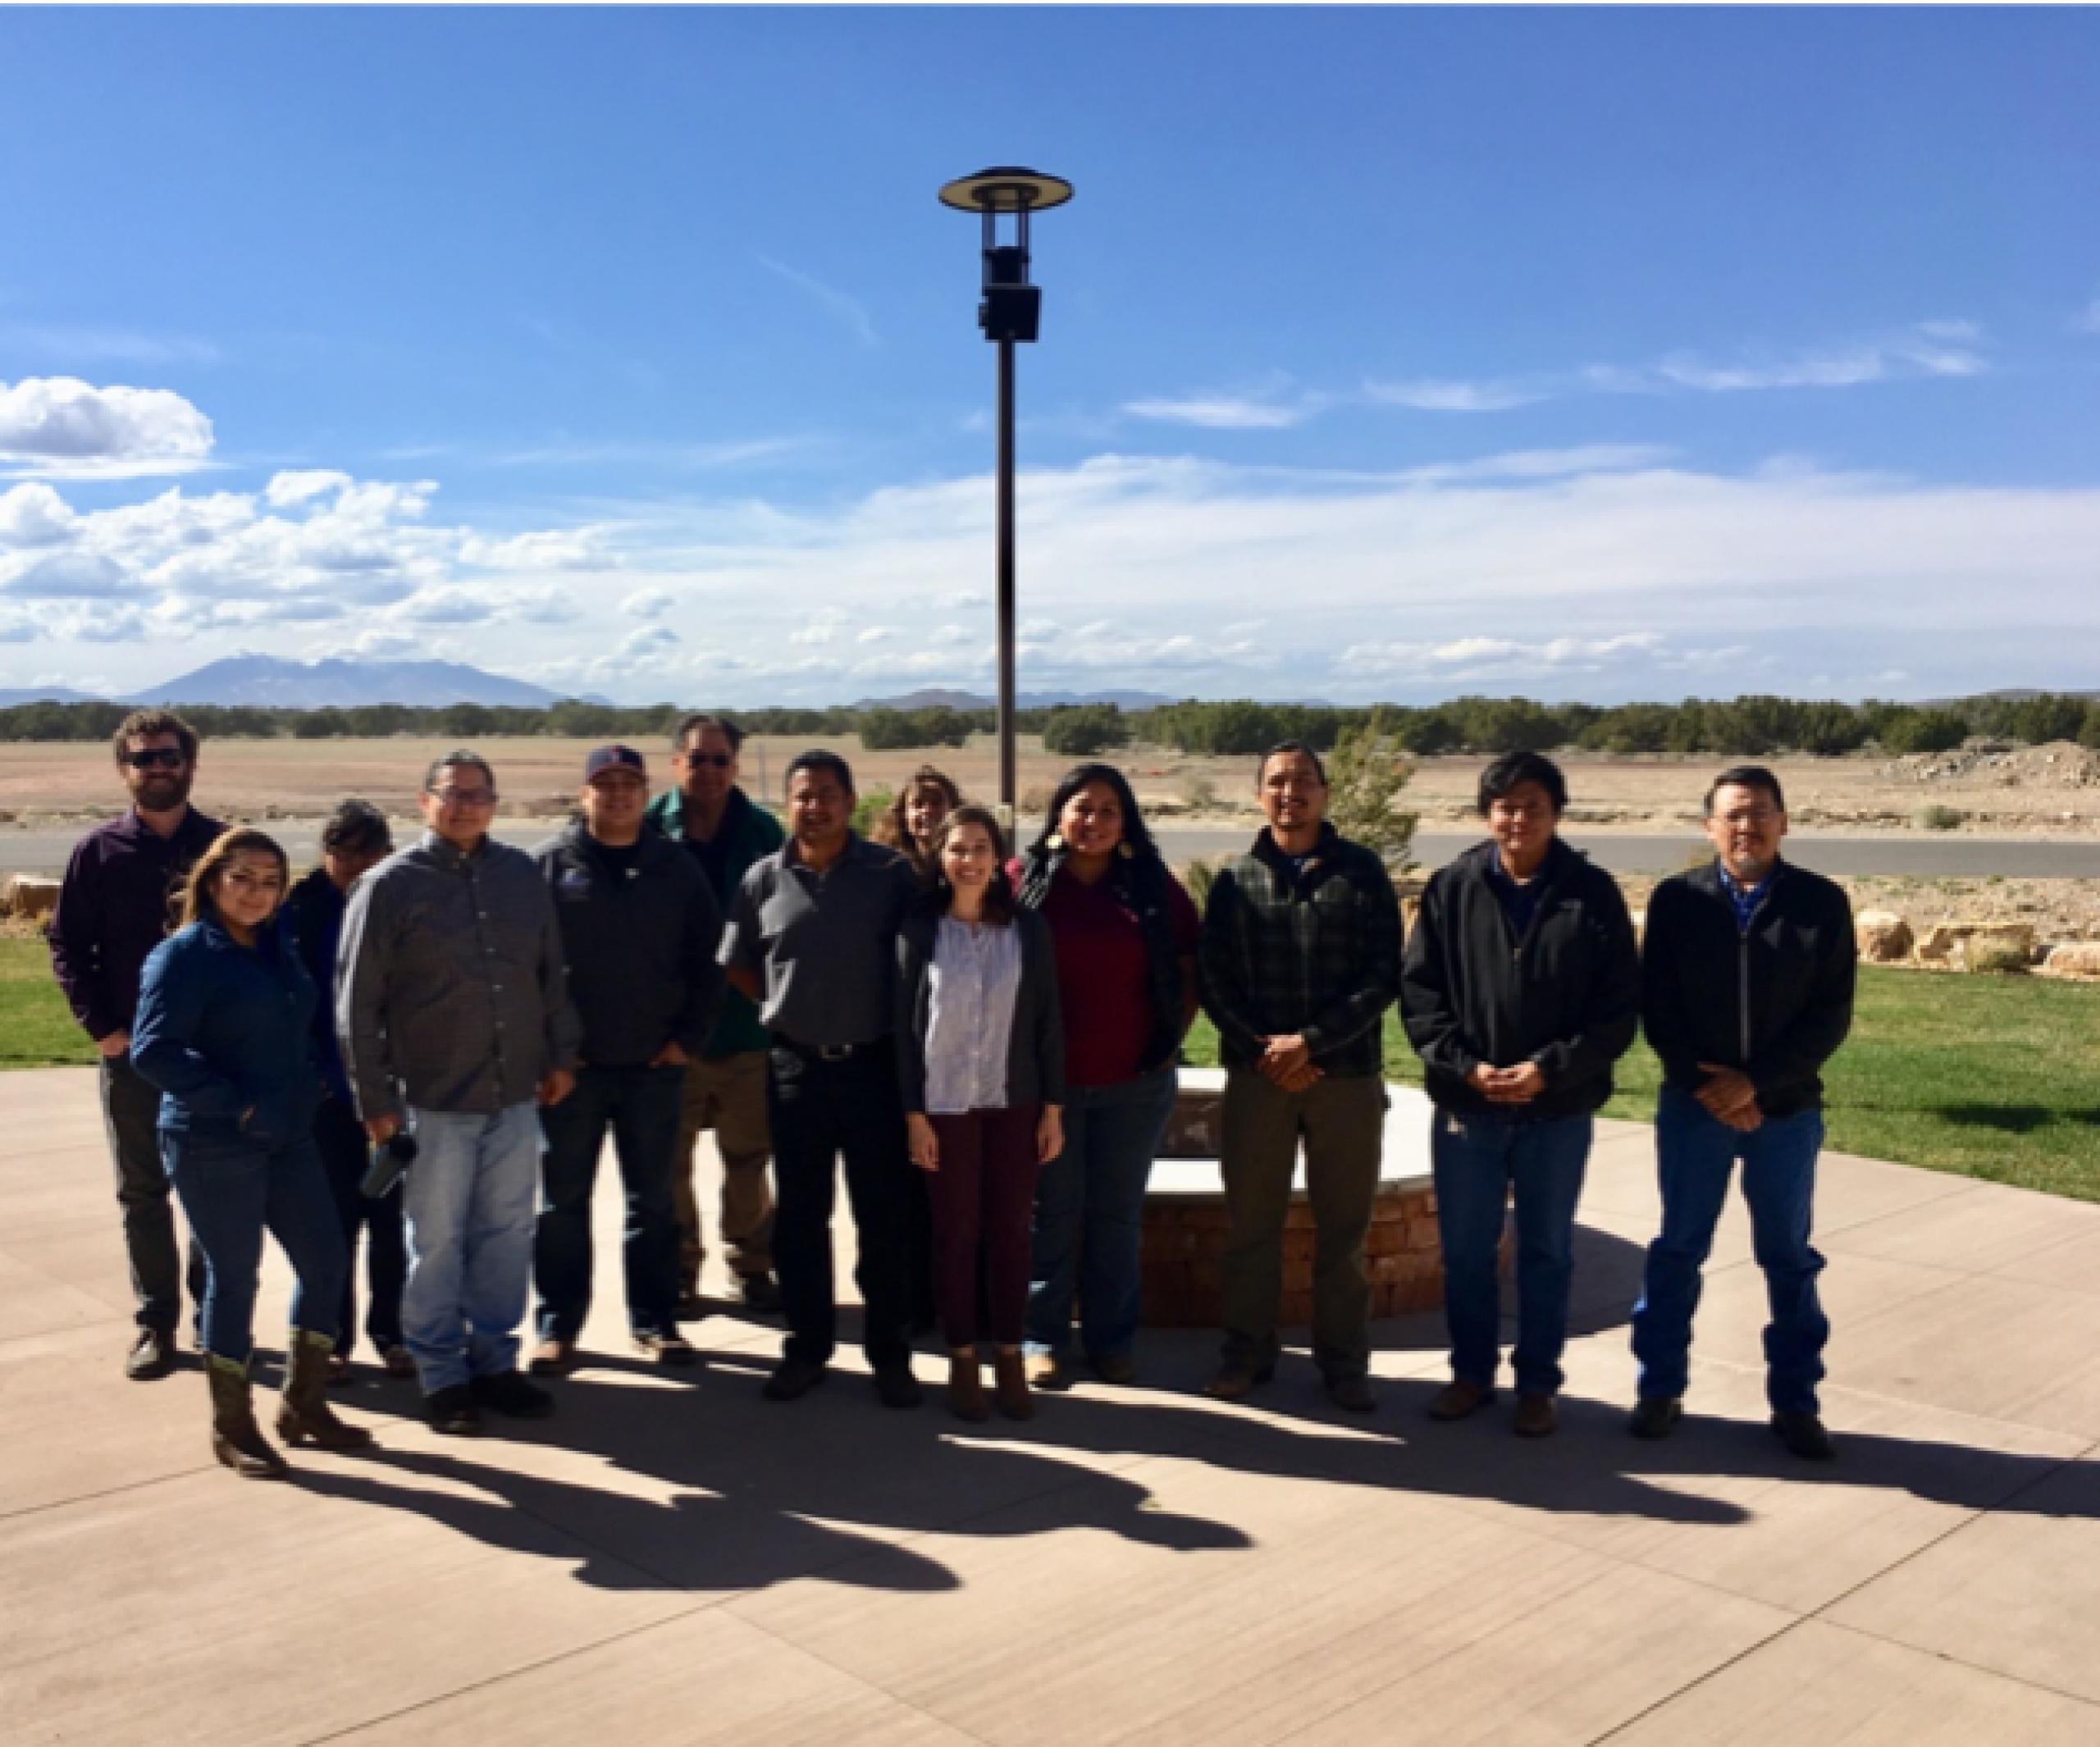 Attendees of the Navajo Nation remote sensing and drought workshop in Flagstaff, Arizona, April 2019.